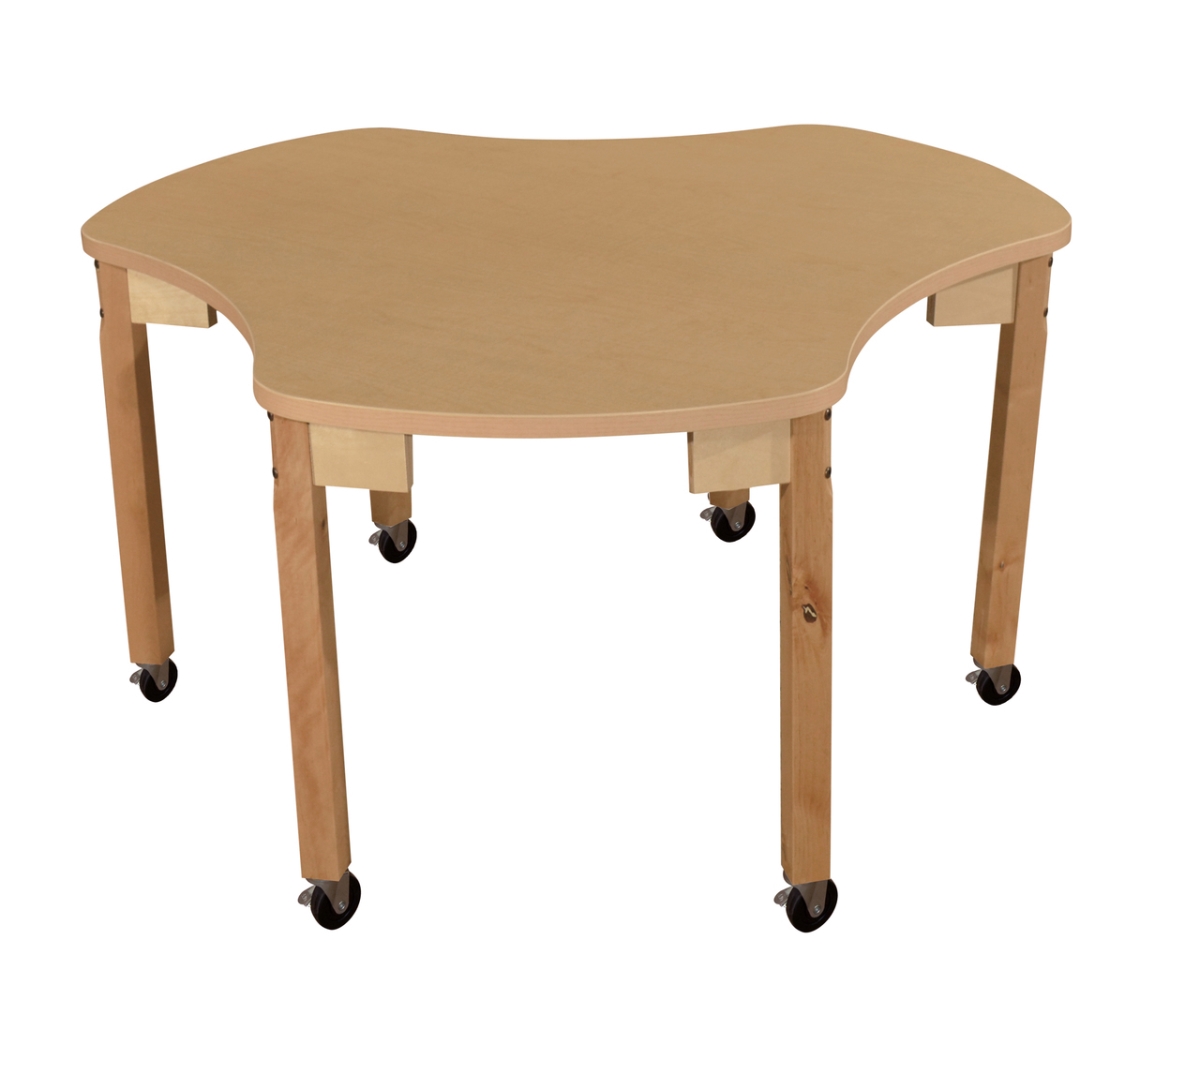 Picture of Wood Designs HPL4448C22C6 44 x 48 in. Mobile Synergy Union High Pressure Laminate Group Table with Hardwood Legs- 22 in.